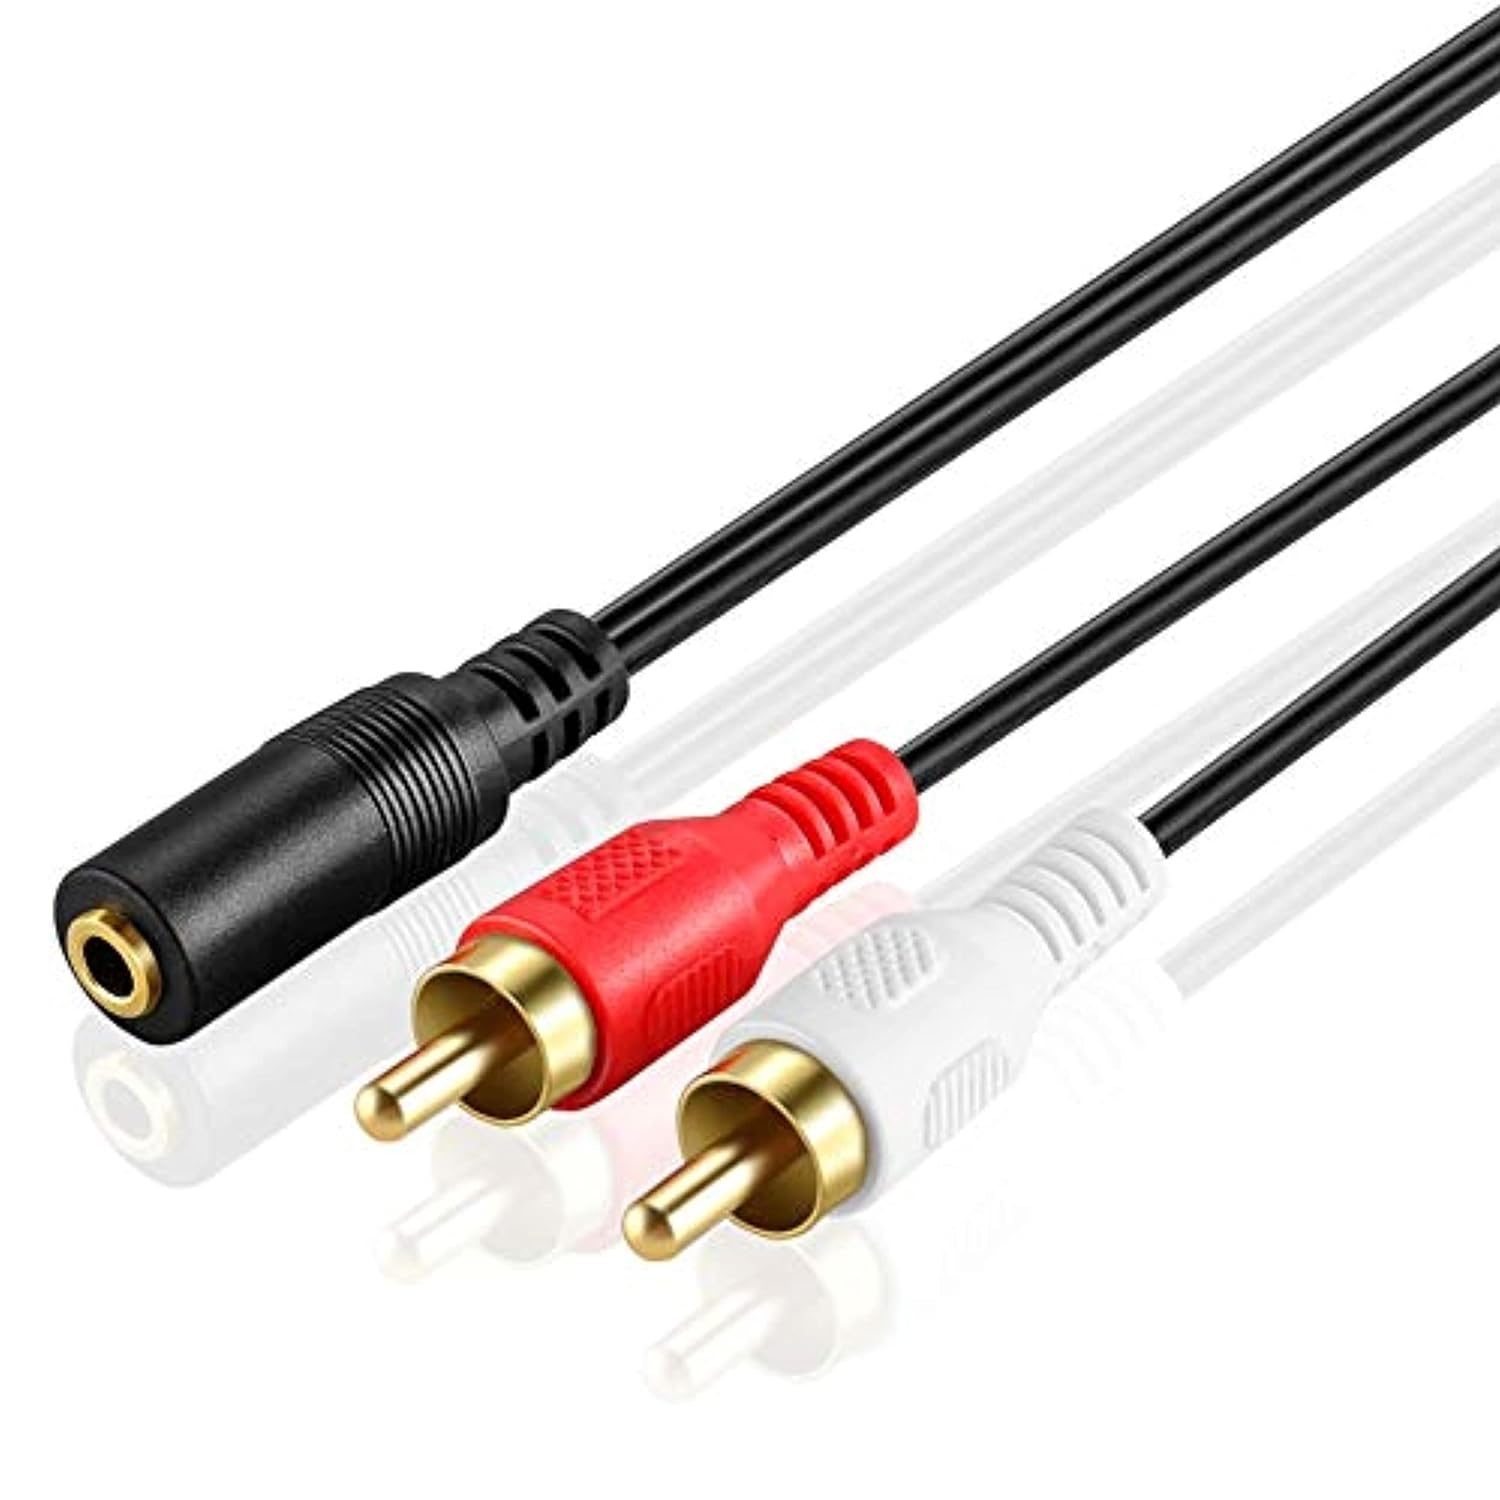 KEBILSHOP 3.5mm Female Stereo Jack to 2 RCA Male Plugs Cable 1.5 Meter/4.9 Ft for Personal Computer